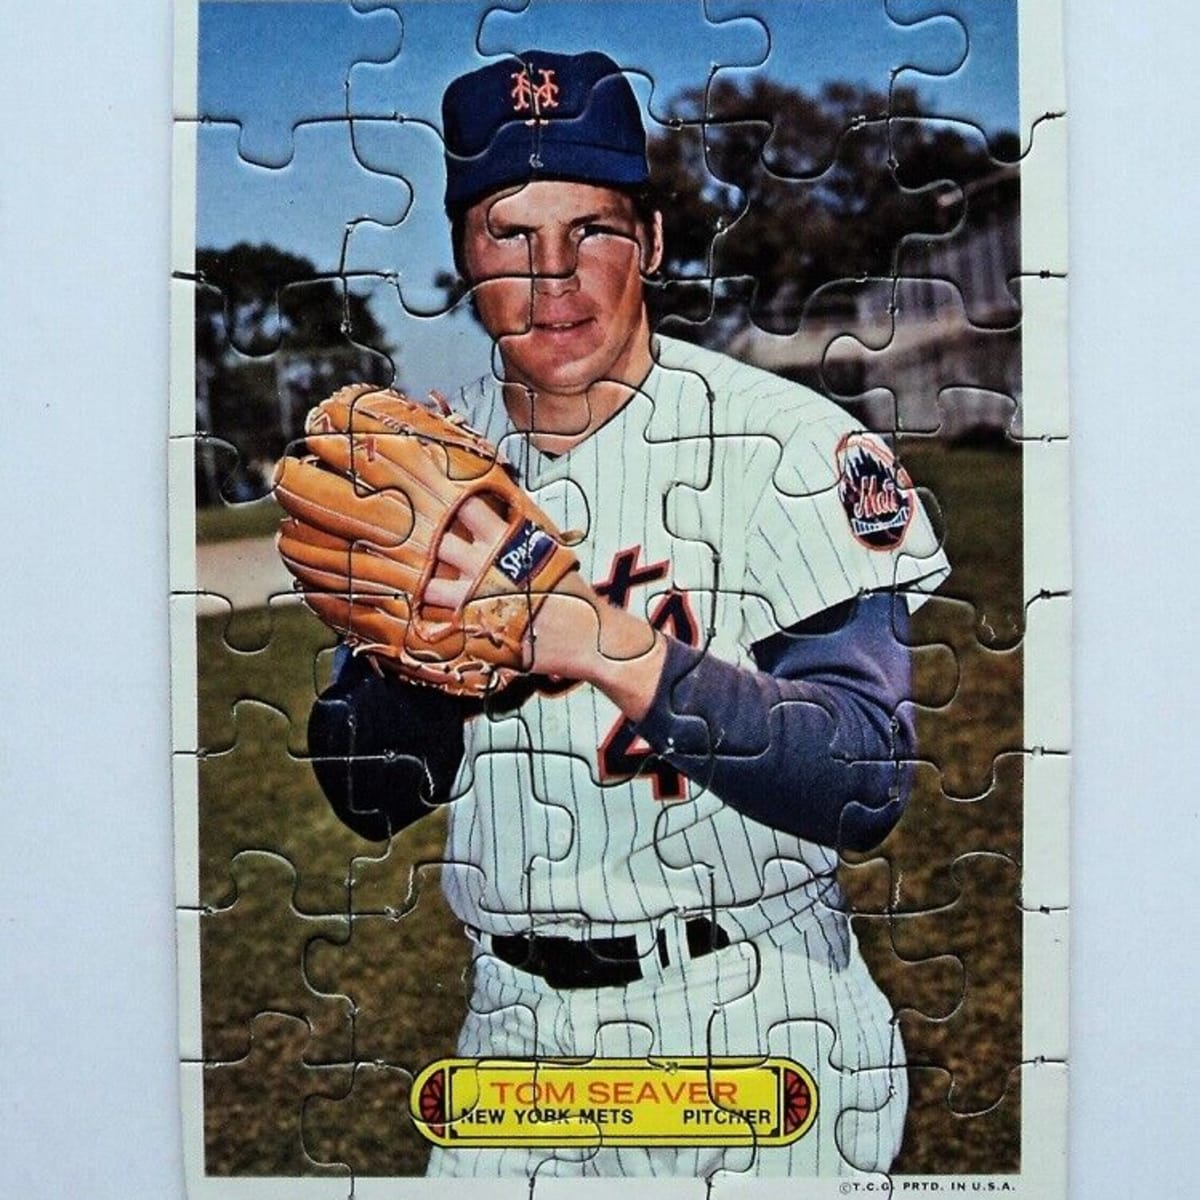 Tom Seaver Sports Card Listed for $2,000 on Flash Sale - Sports Illustrated  Collectibles News, Analysis and More